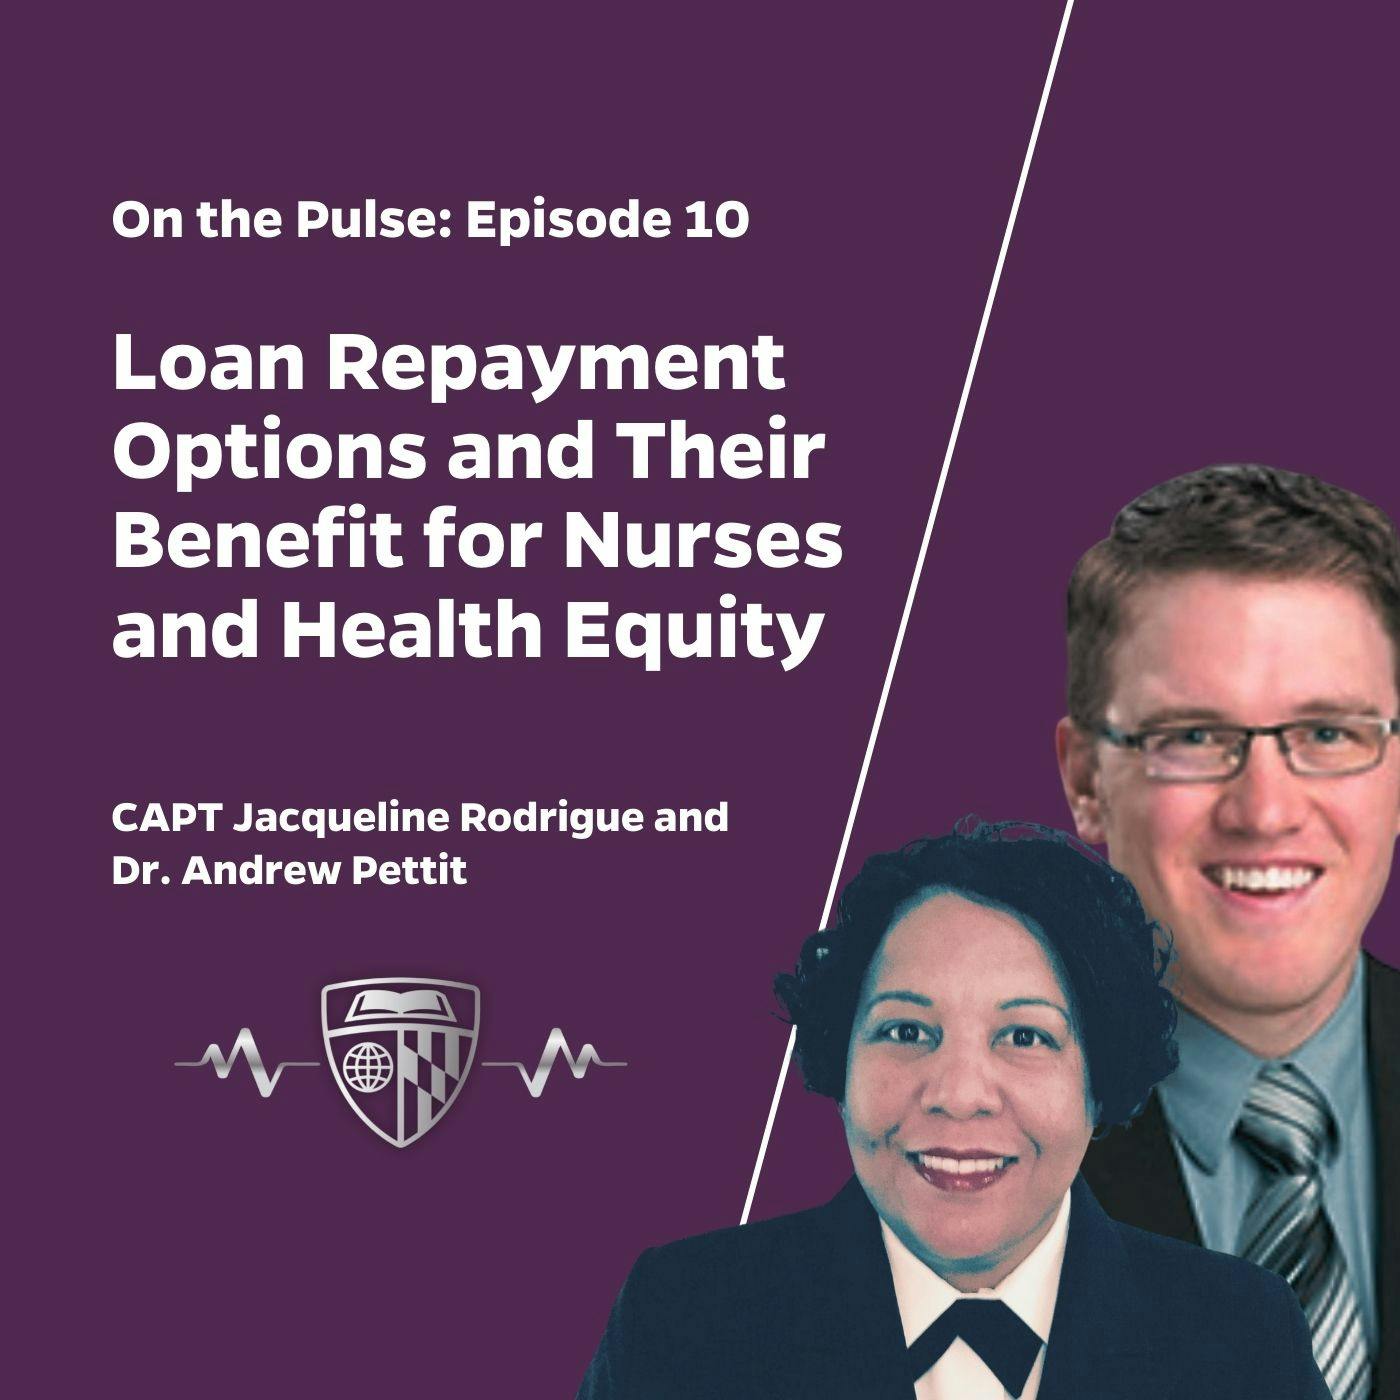 On The Pulse: Loan Repayment Options and Their Benefit for Nurses and Health Equity